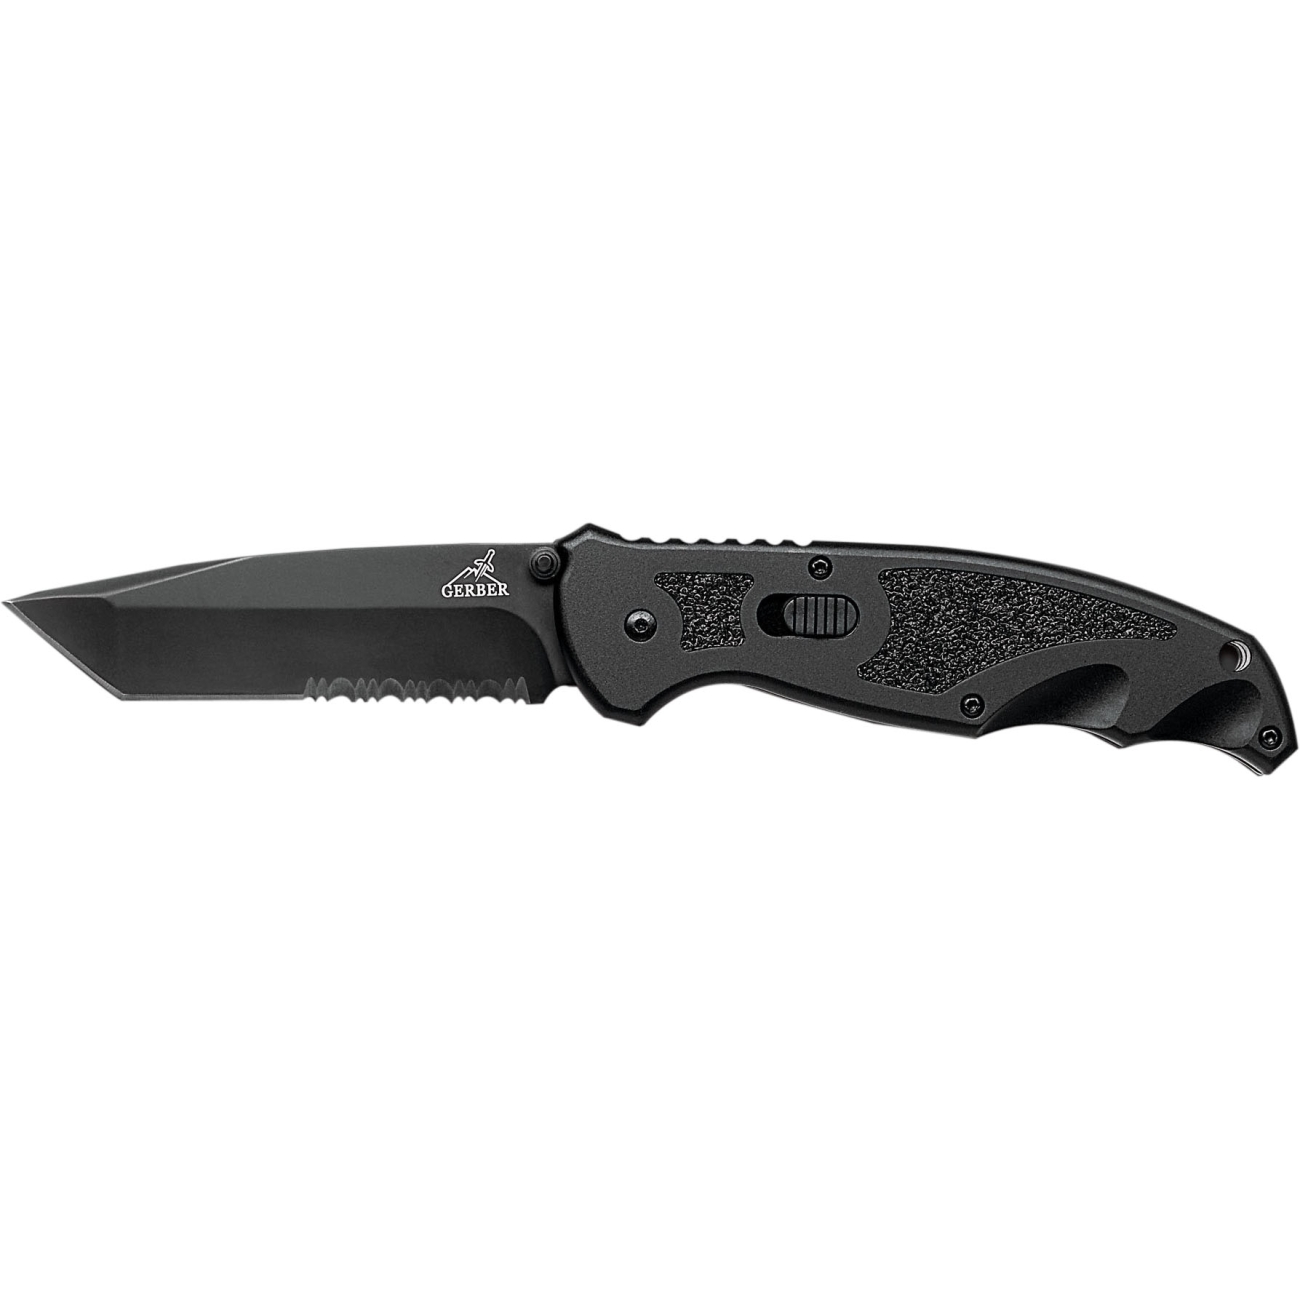 KNIFE, ANSWER 3.25, TANTO, SERRATED,